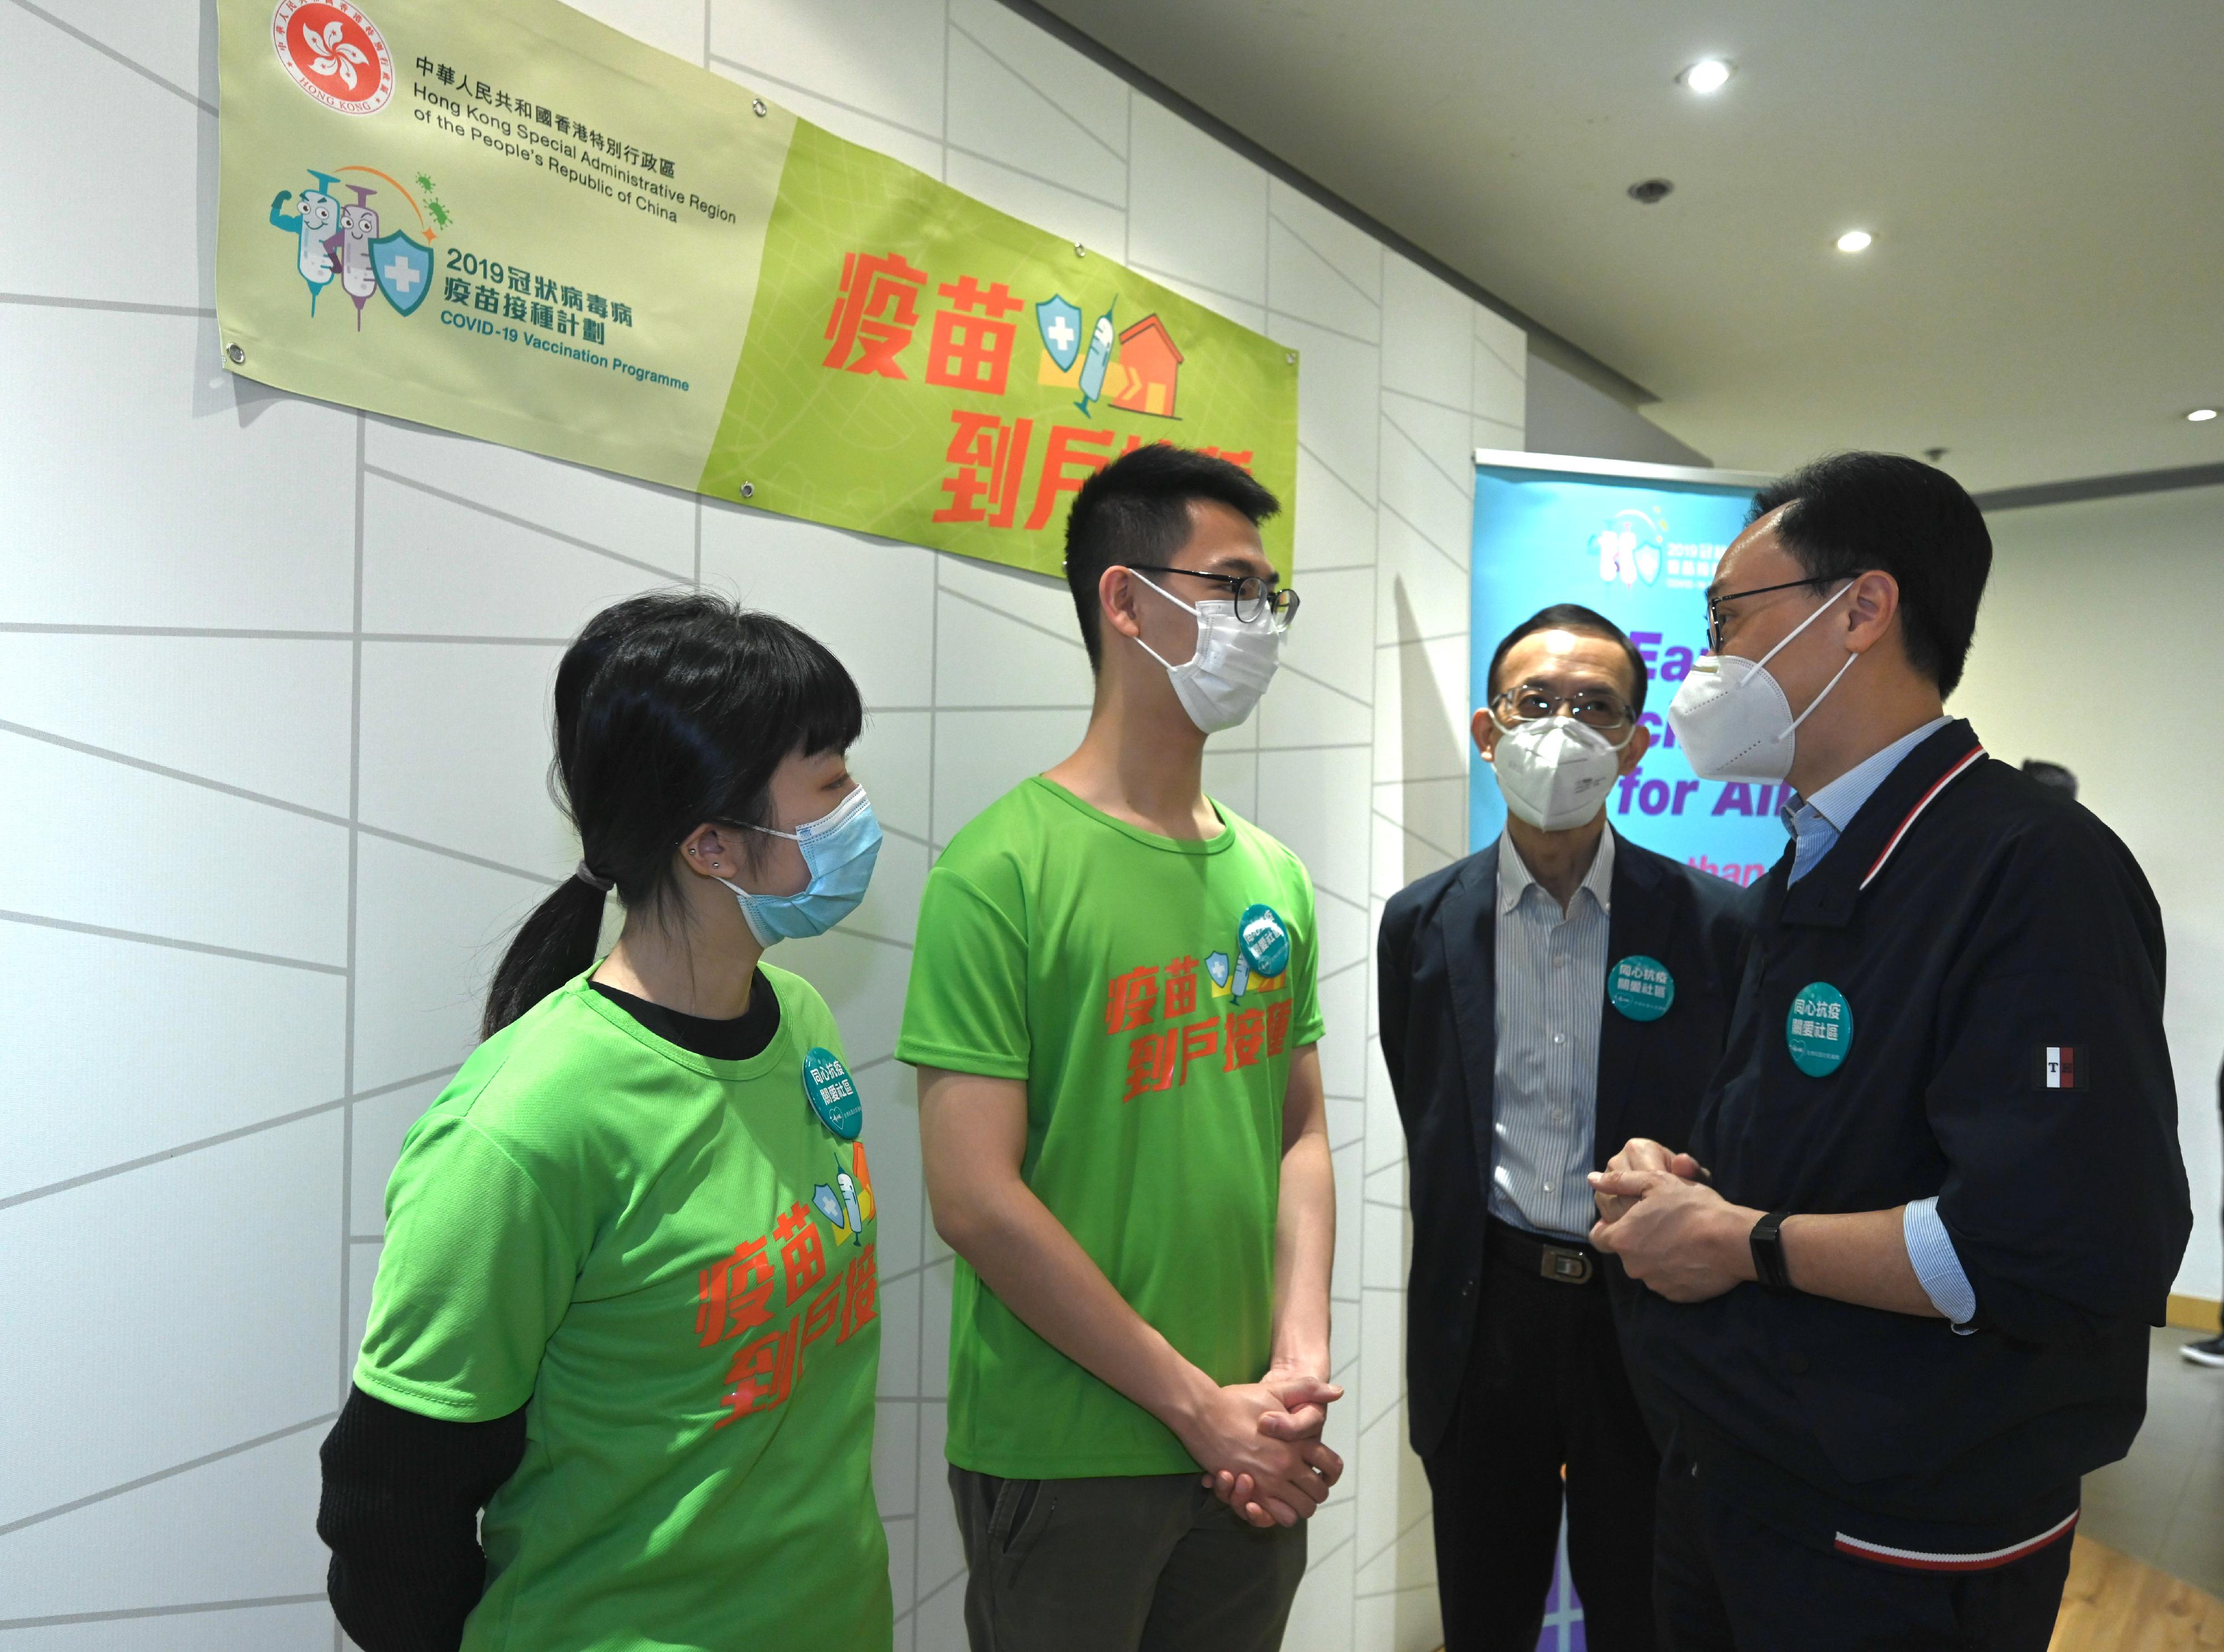 The Home Vaccination Service is open for online and phone registration starting from today (April 19). The Secretary for the Civil Service, Mr Patrick Nip, visited the call centre at the Hong Kong Spinners Industrial Building in Cheung Sha Wan to view the first-day operation of the centre. Mr Nip (first right) is pictured chatting with staff of the Home Vaccination Service to learn about their work. Next to Mr Nip is the Dean of the School of Health Sciences of the Caritas Institute of Higher Education, Professor Eric Chan (second right).